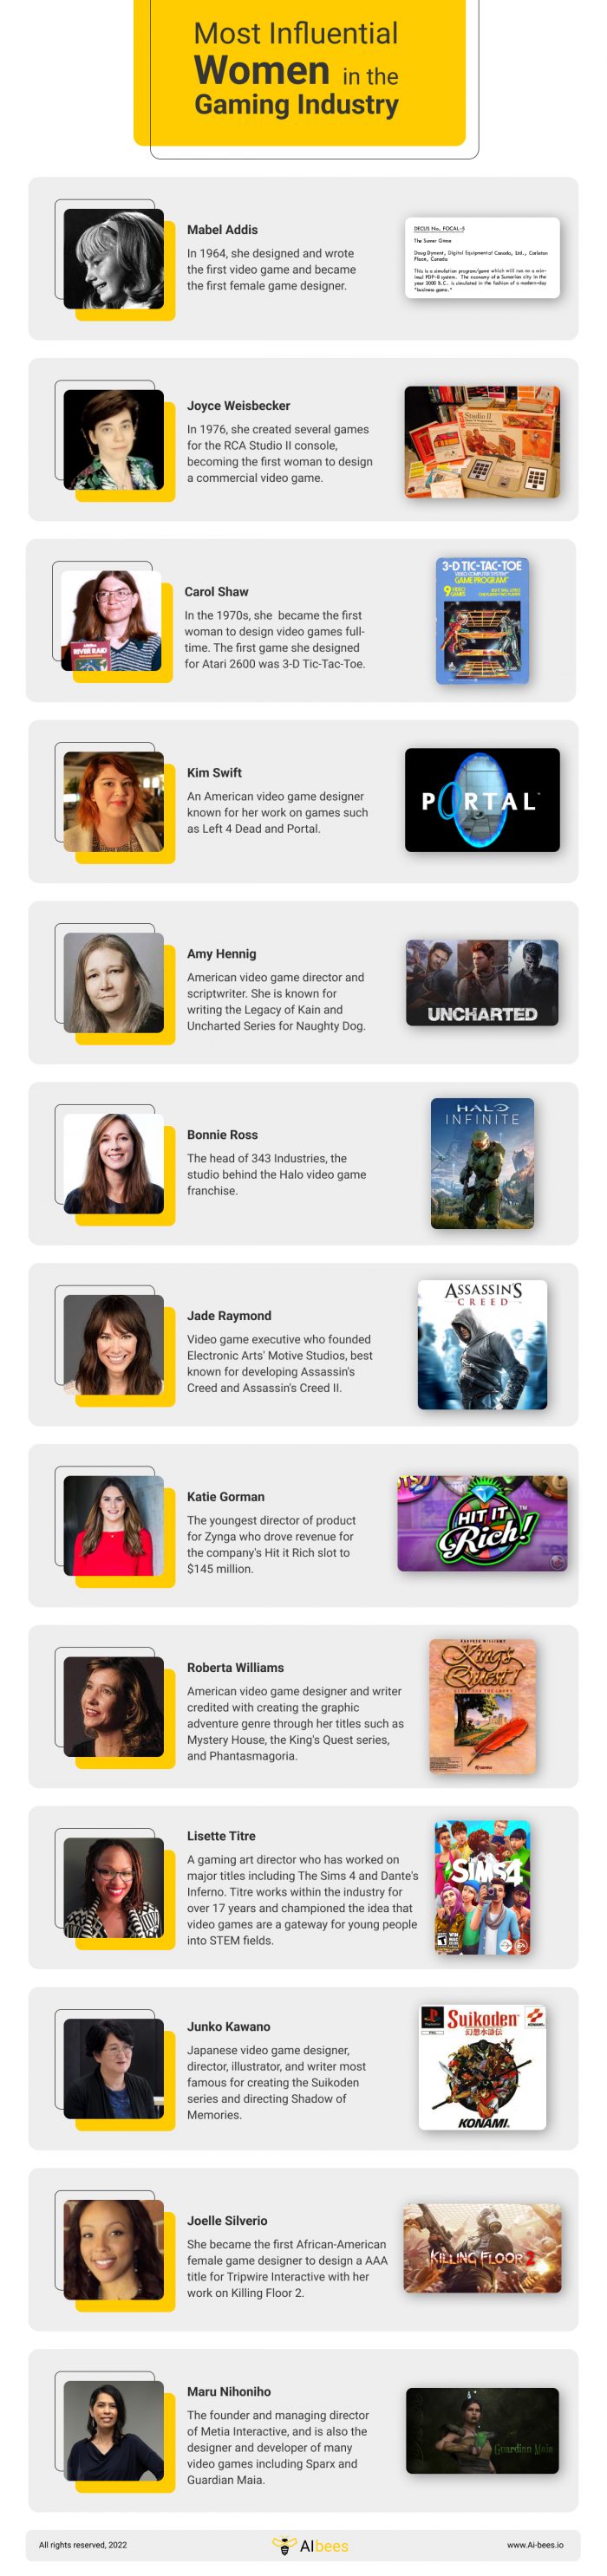 13 most influential women in the gaming industry